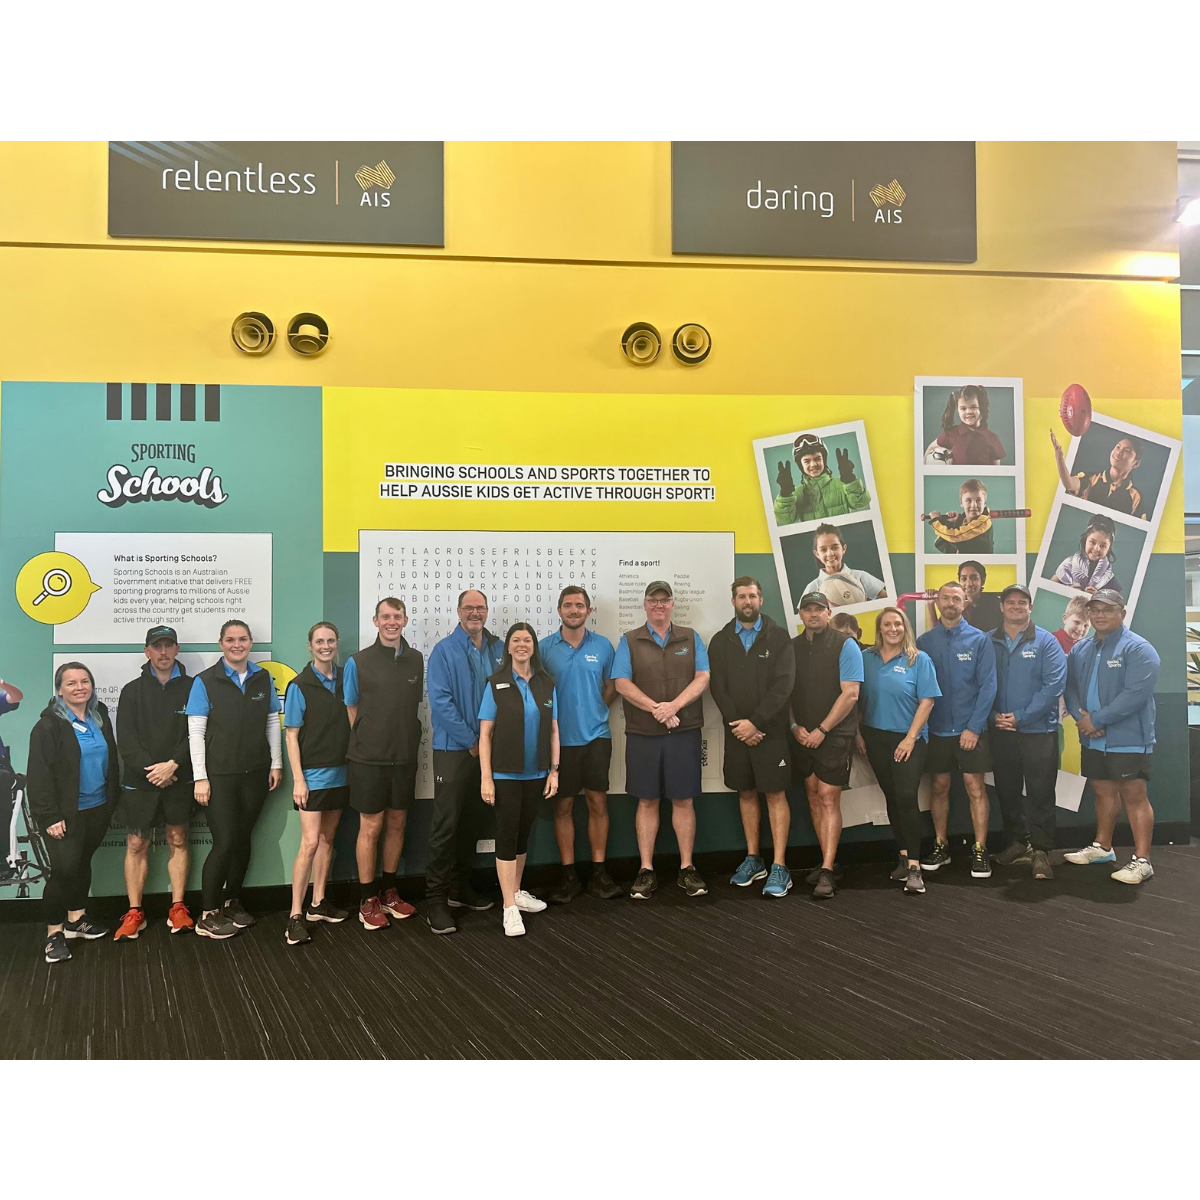 The image shows a group of fifteen individuals posing together in front of a vibrant display with yellow and blue tones. The display is related to a program called "Sporting Schools," which aims to integrate sports into schools and encourage physical activity among Australian children. The group, wearing coordinated blue and grey sportswear, stands smiling before panels adorned with photos of children engaged in various sports, and informative texts like "Bringing schools and sports together to help Aussie kids get active through sport."